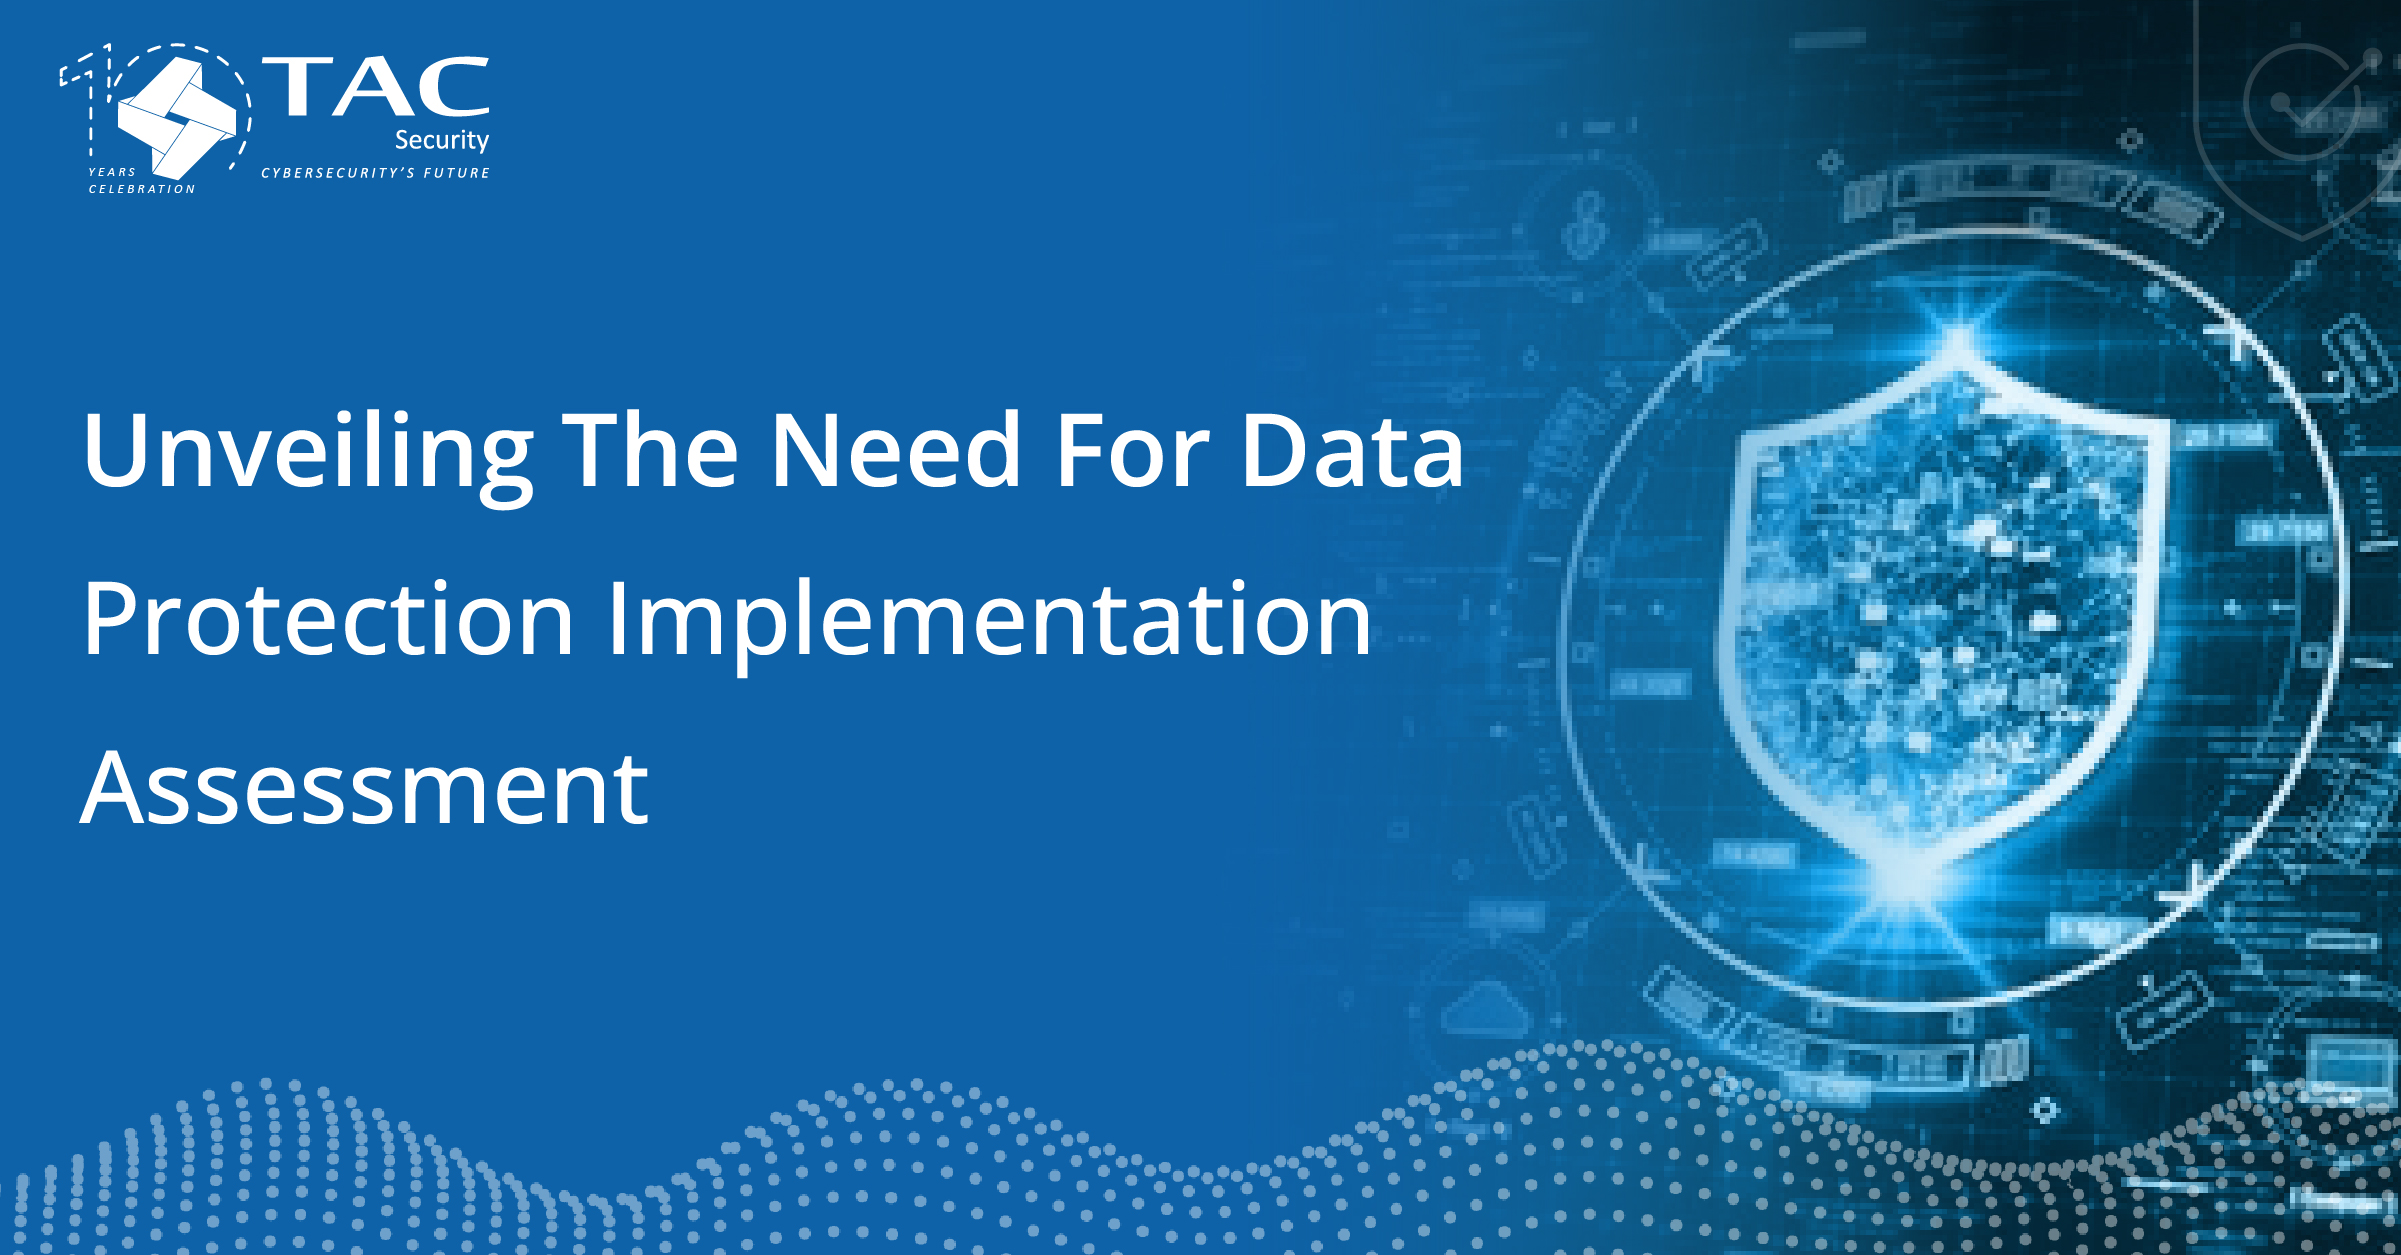 Data Protection Implementation Assessment